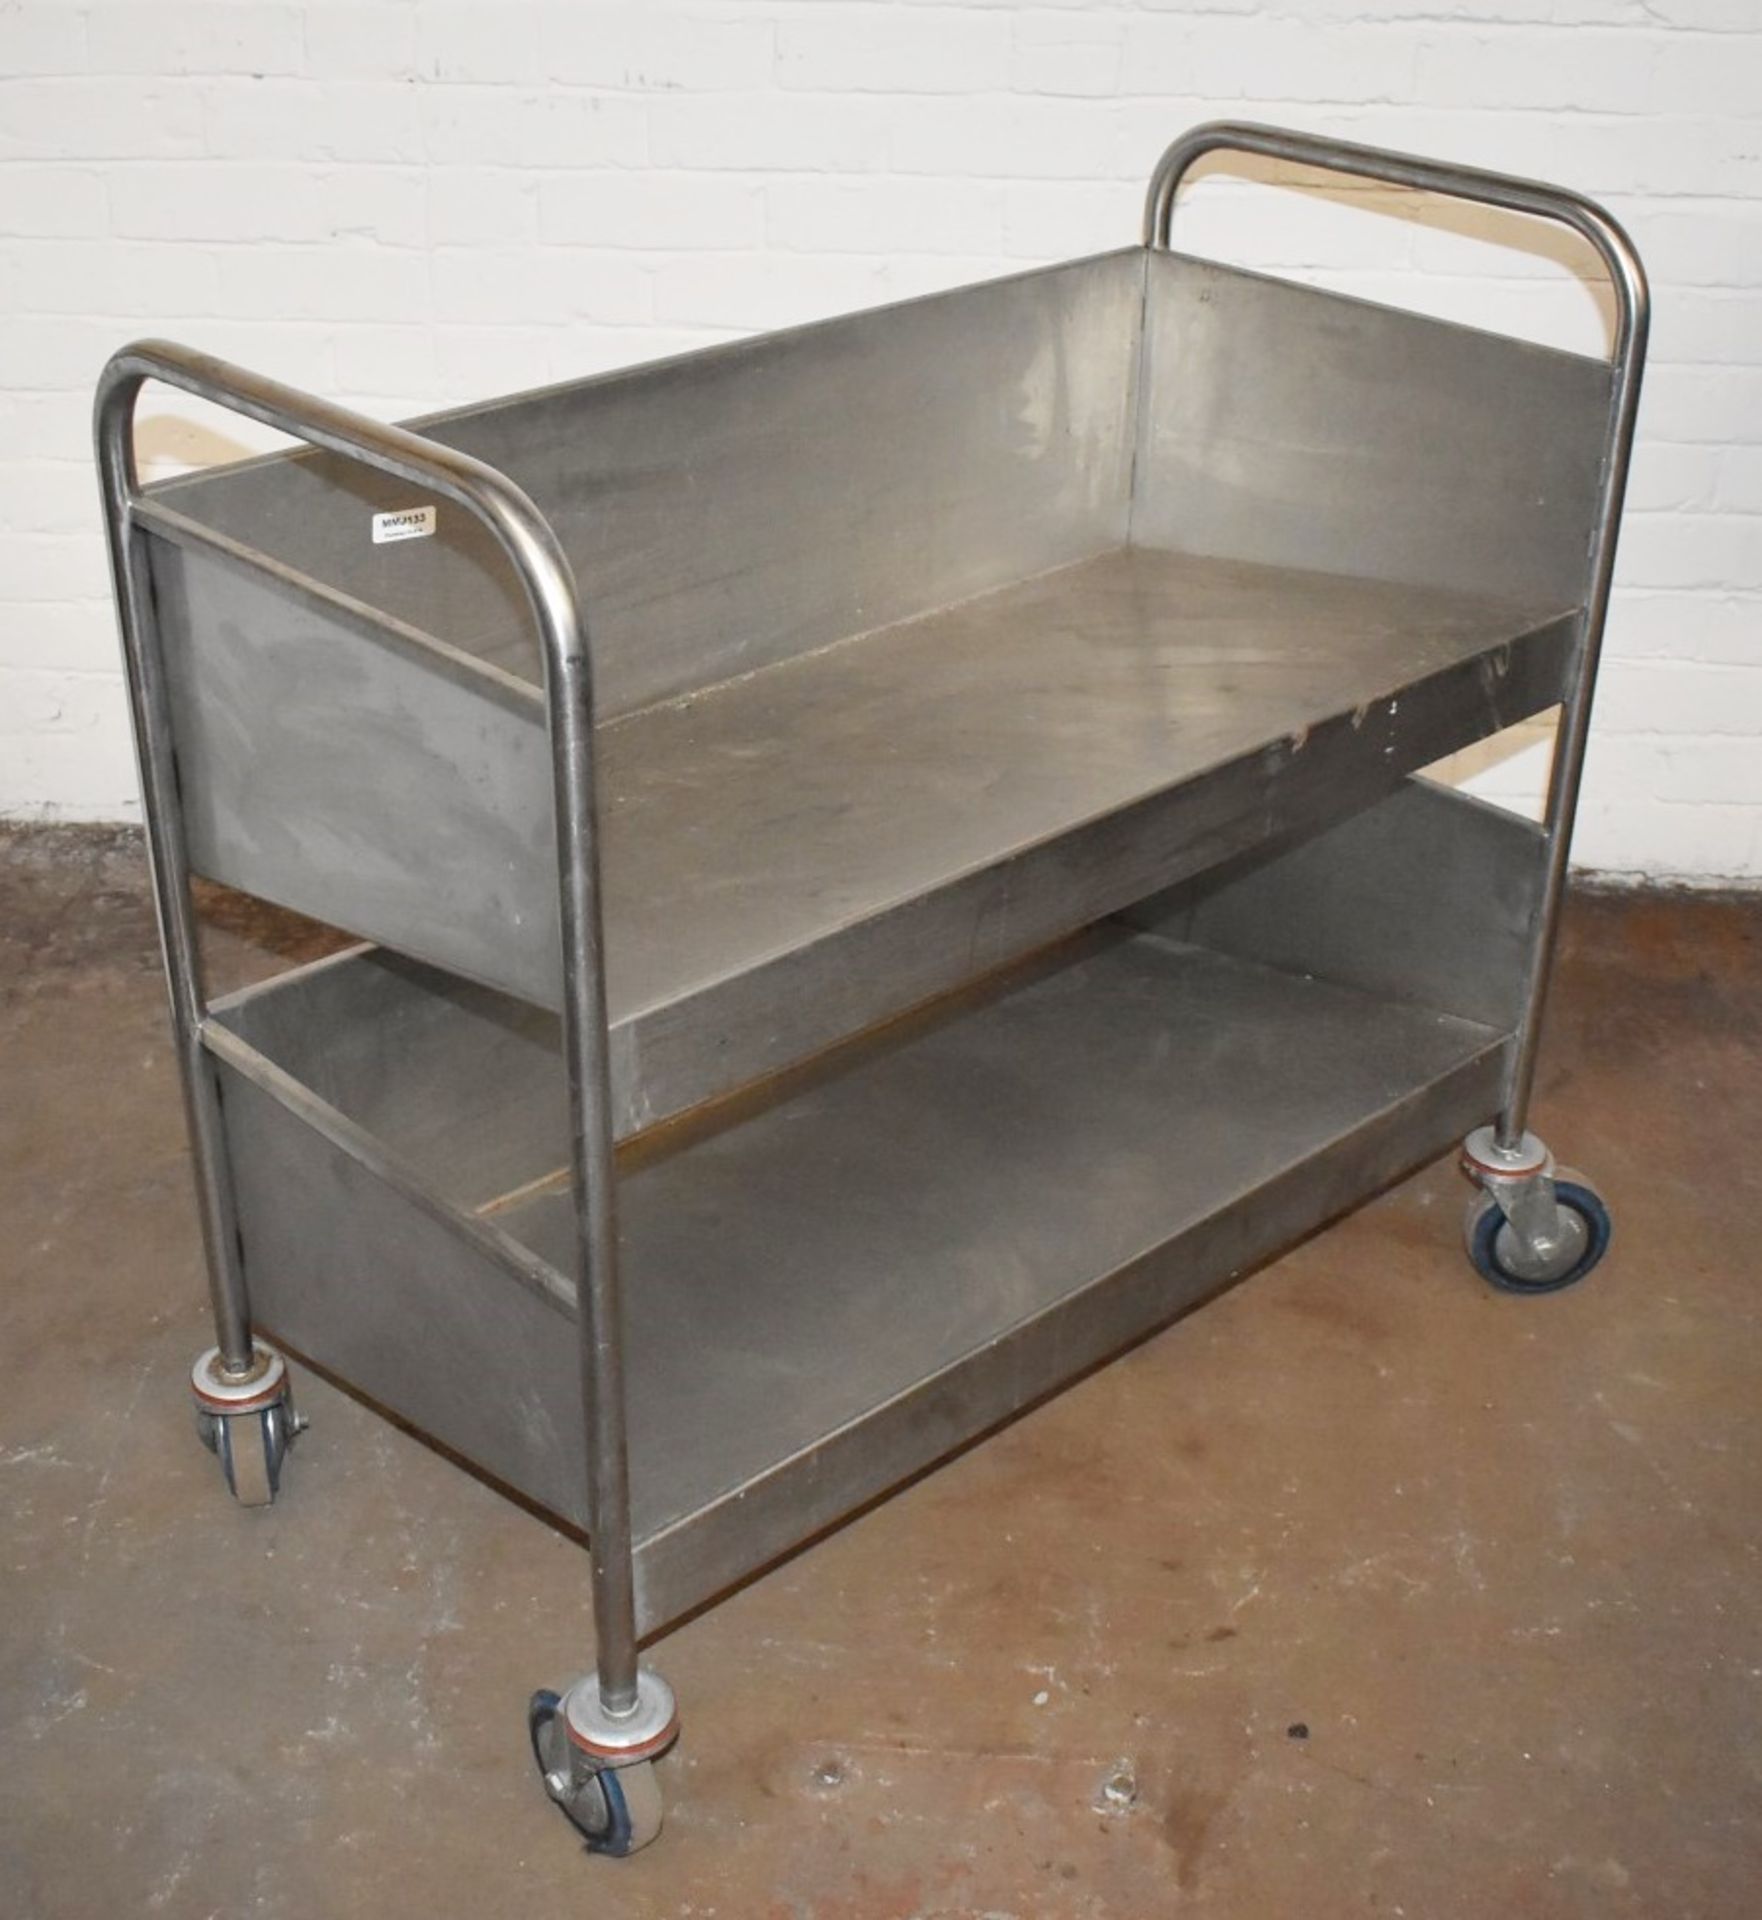 1 x Stainless Steel Trolley With Slanting Shelves and Heavy Duty Castors - Dimensions: H98 x W103